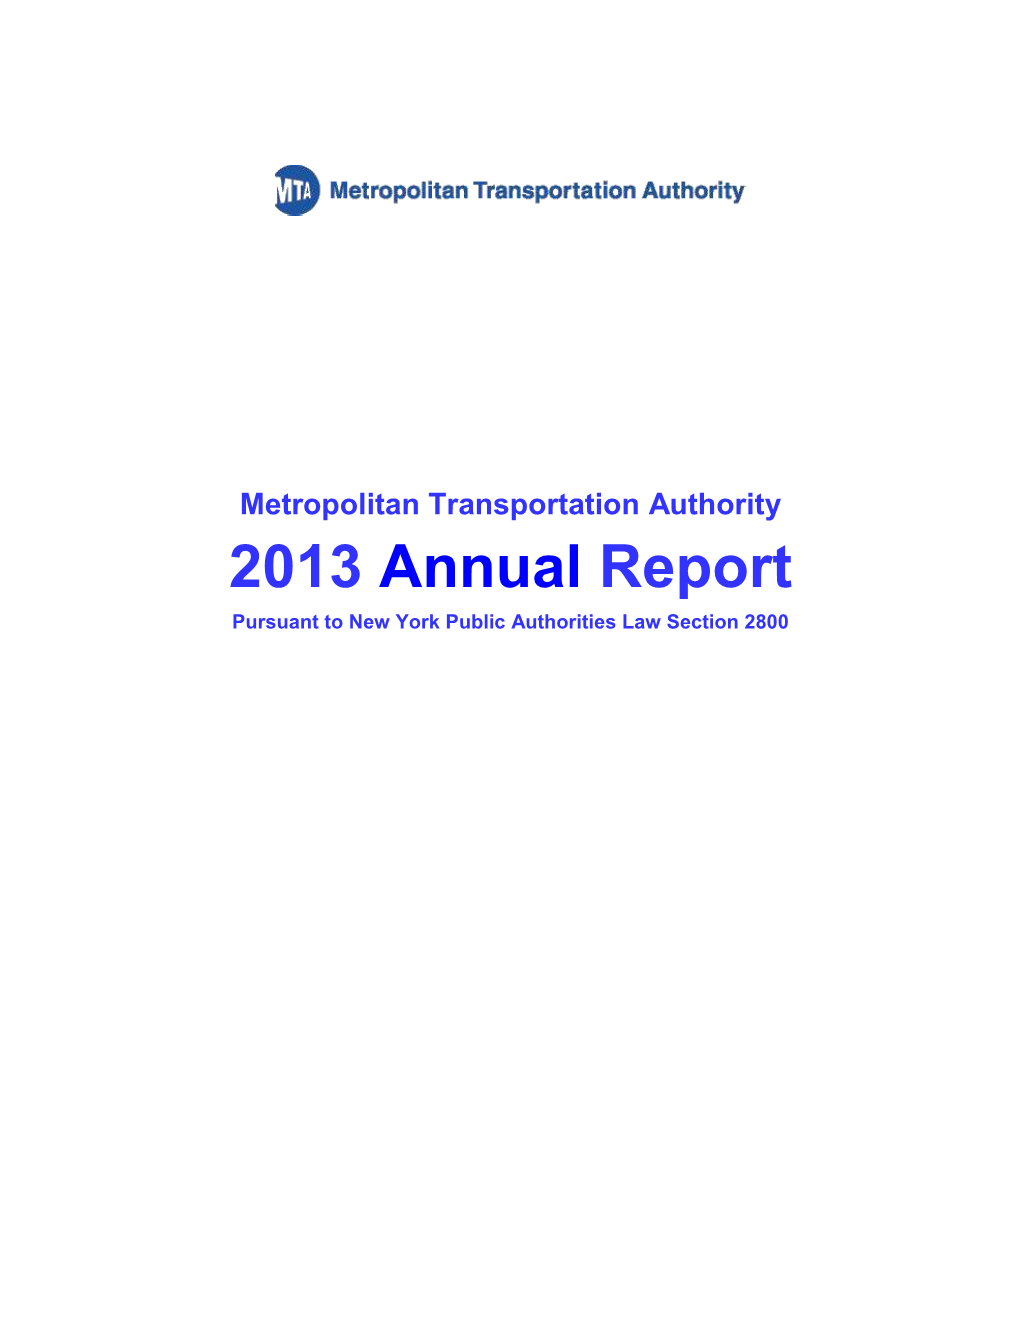 Metropolitan Transportation Authority 2013 Annual Report Pursuant to New York Public Authorities Law Section 2800